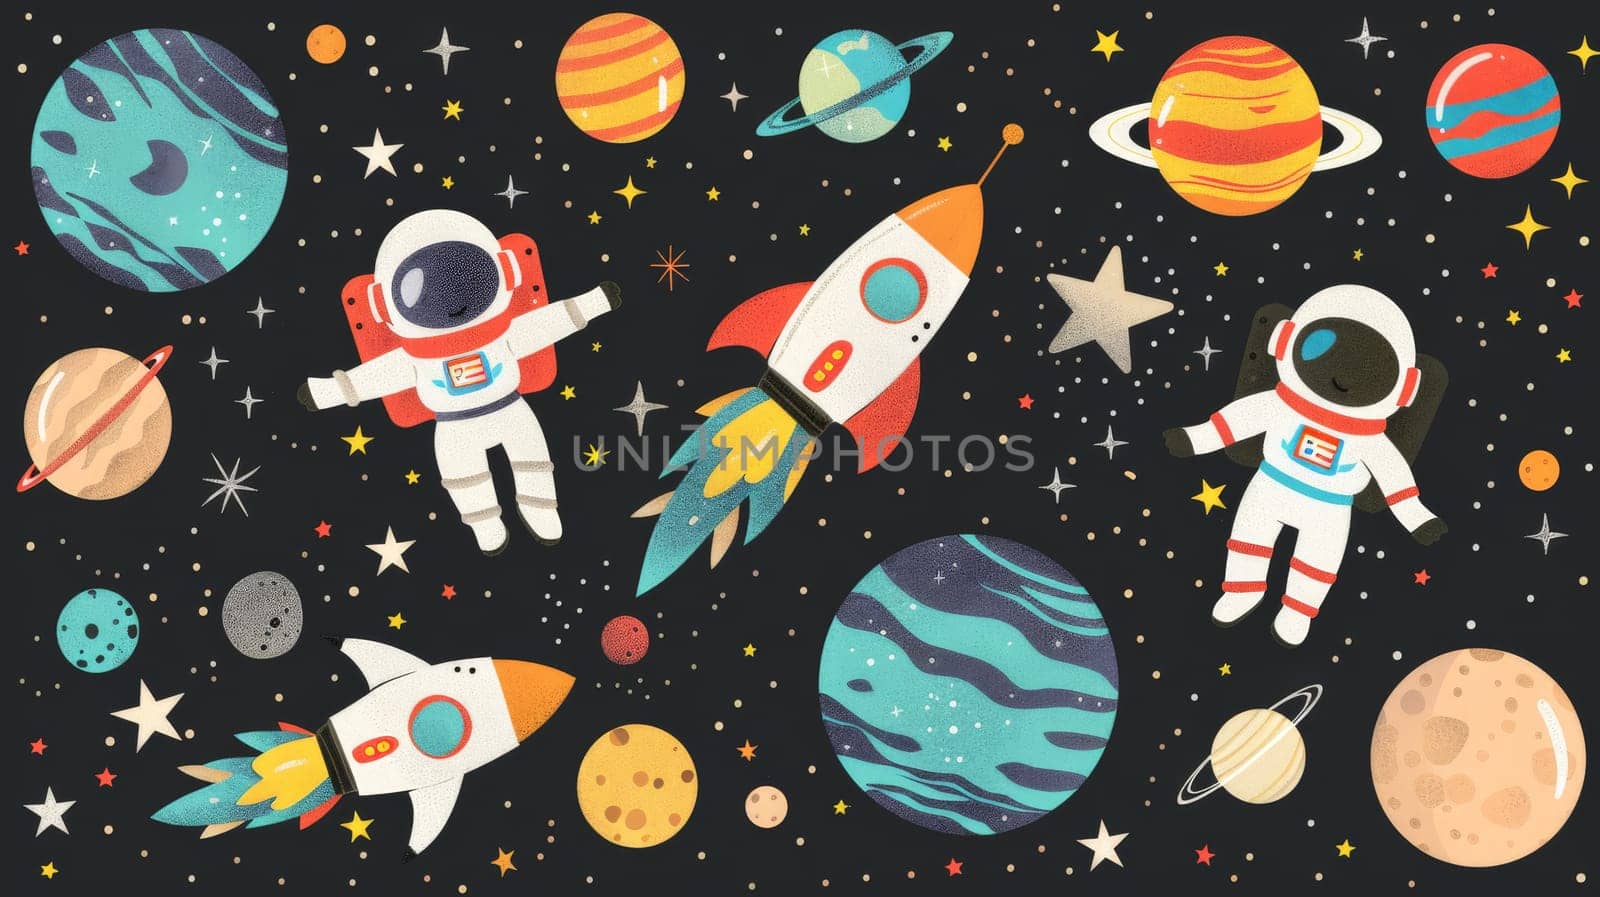 wallpaper of space adventure with adorable astronauts rockets and planets, Cute galaxy by nijieimu